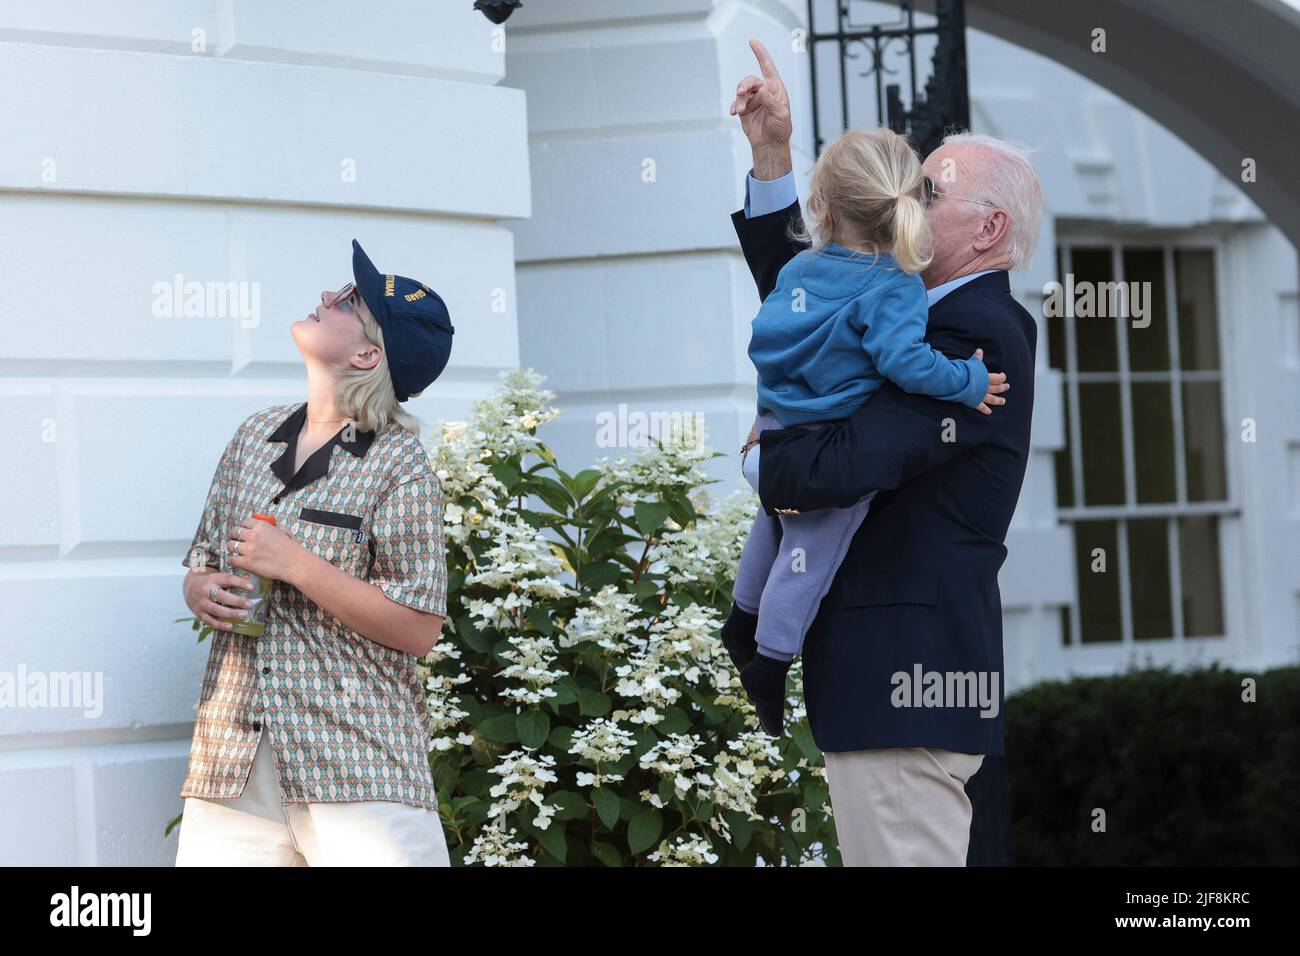 President Joe Biden lifts his grandson Beau Biden, center, the son of Hunter Biden, as granddaughter Maisy Biden, left, watches, after Biden returned to Washington, DC on June 30, 2022. Biden returned to Washington after attending summits in Germany and Spain. Photo by Oliver Contreras/Pool/ABACAPRESS.COM Stock Photo